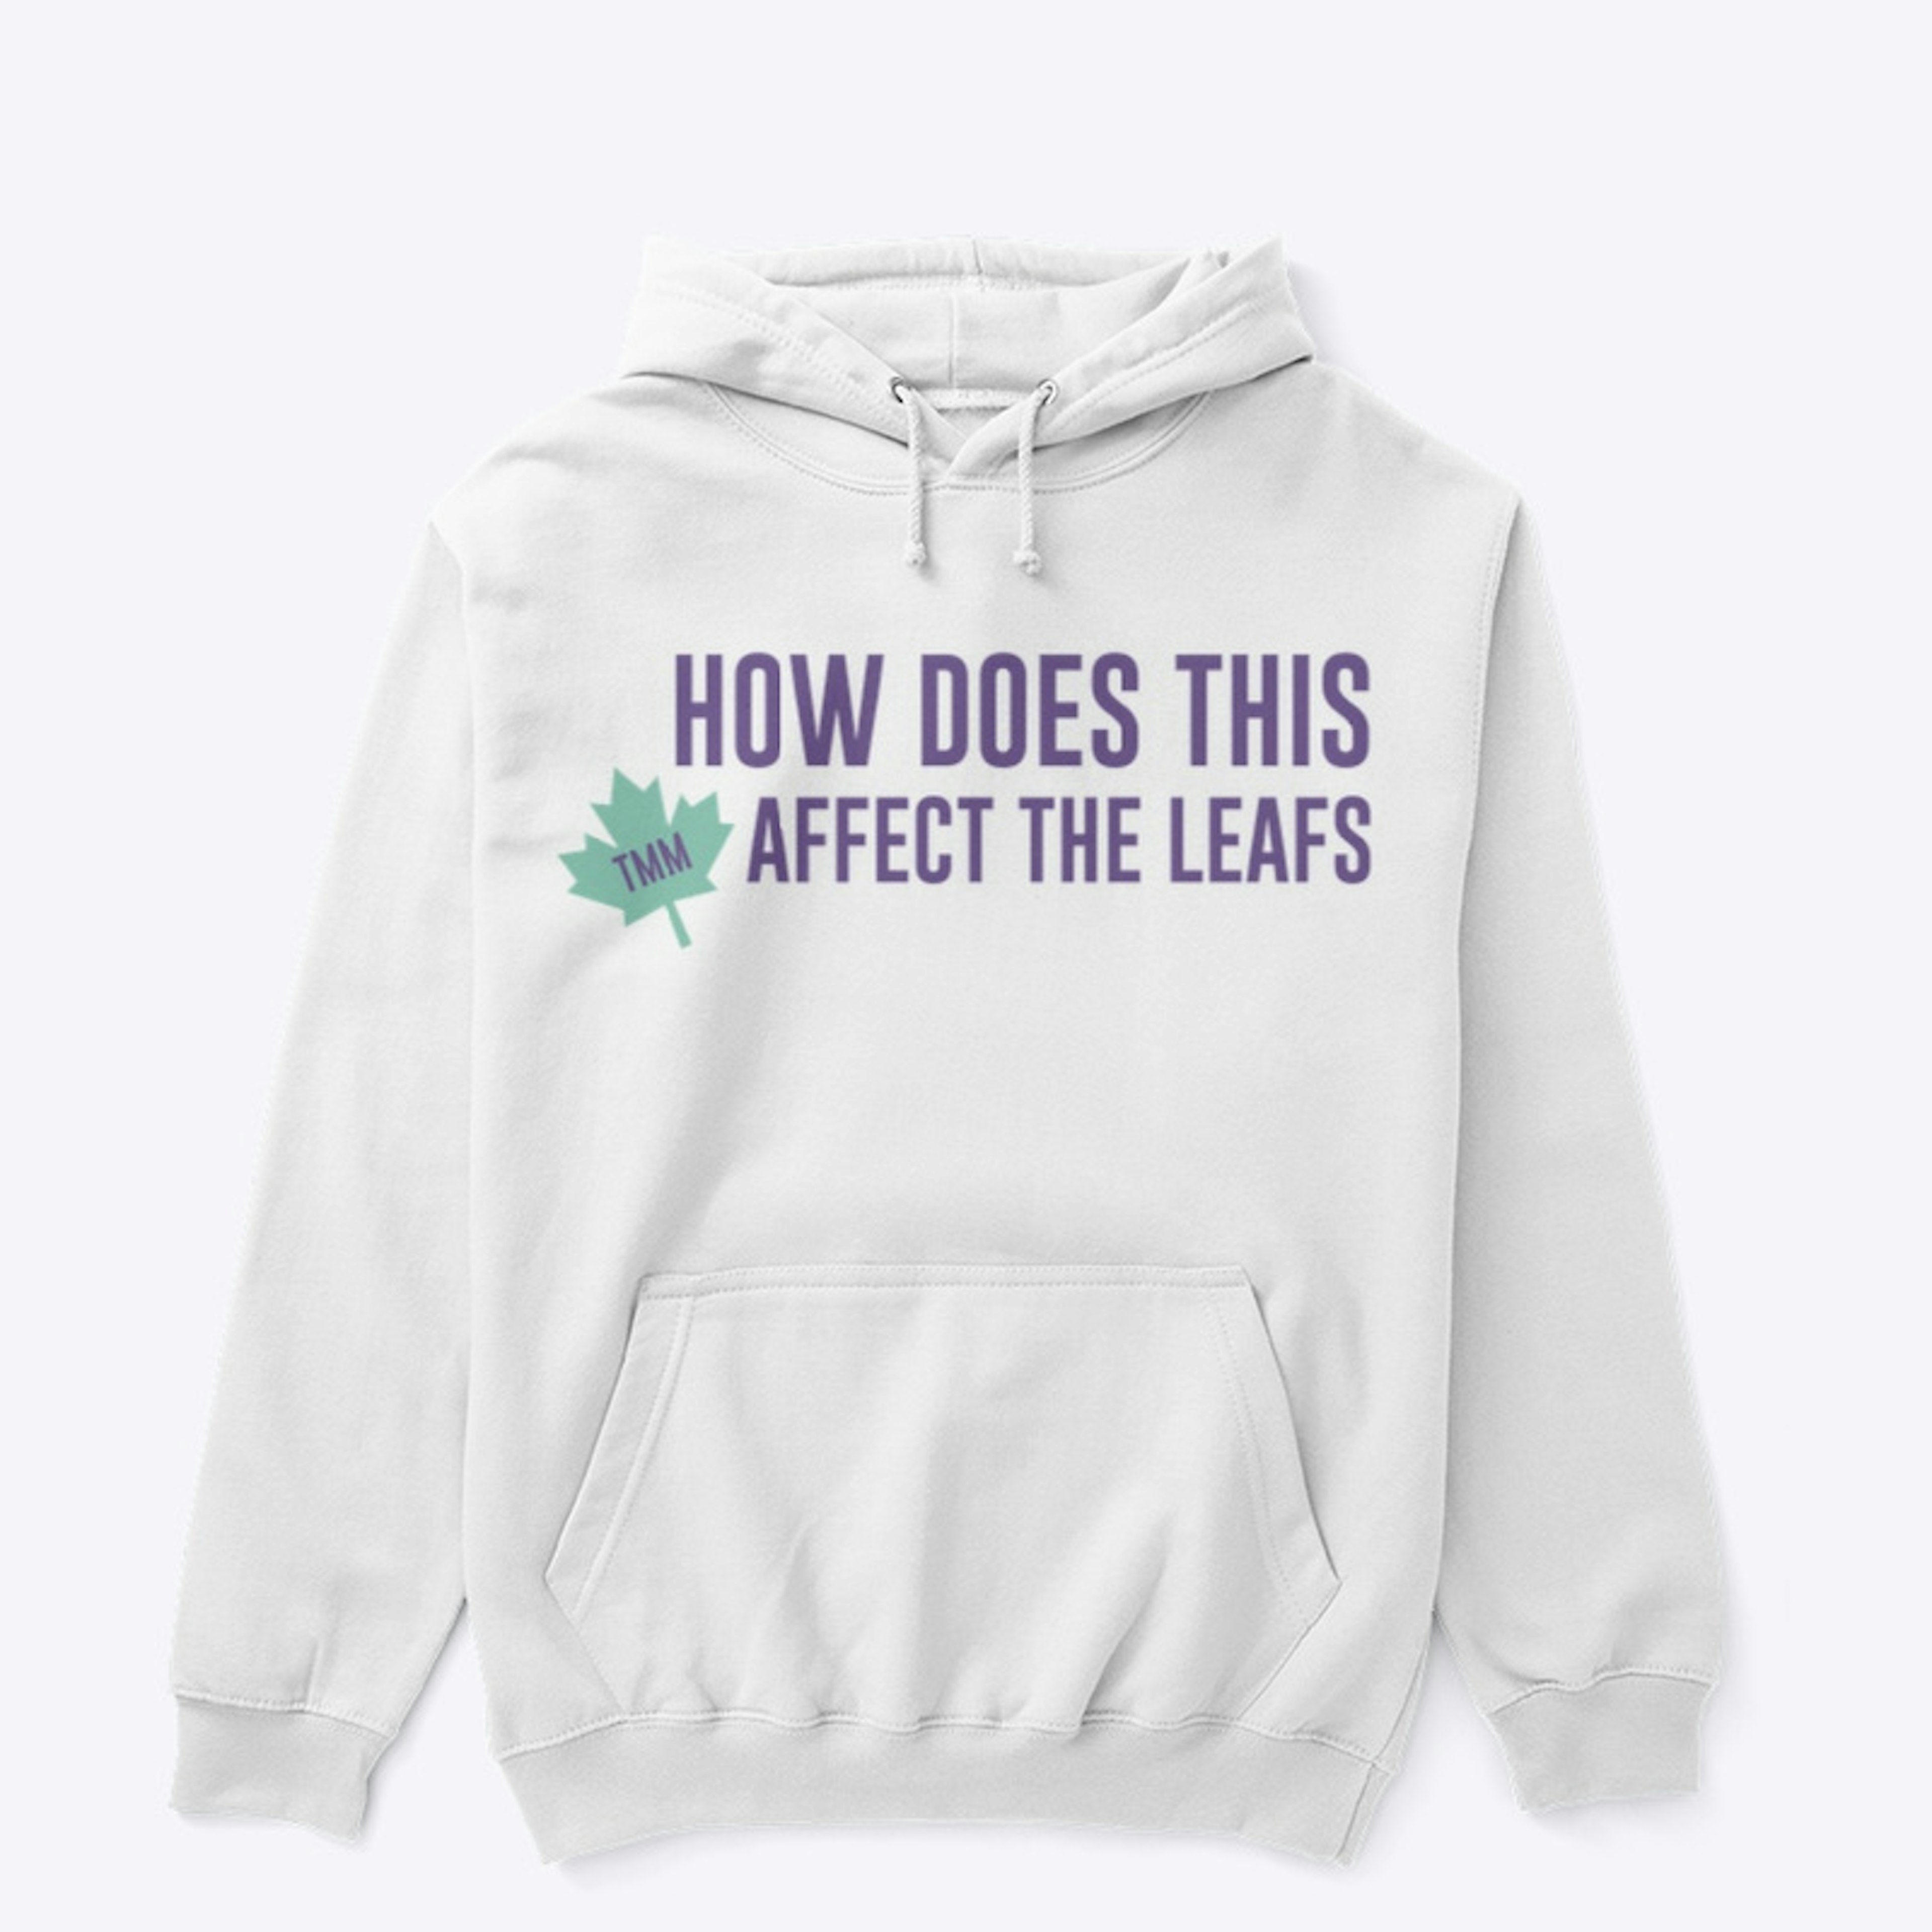 How does this affect the Leafs merch